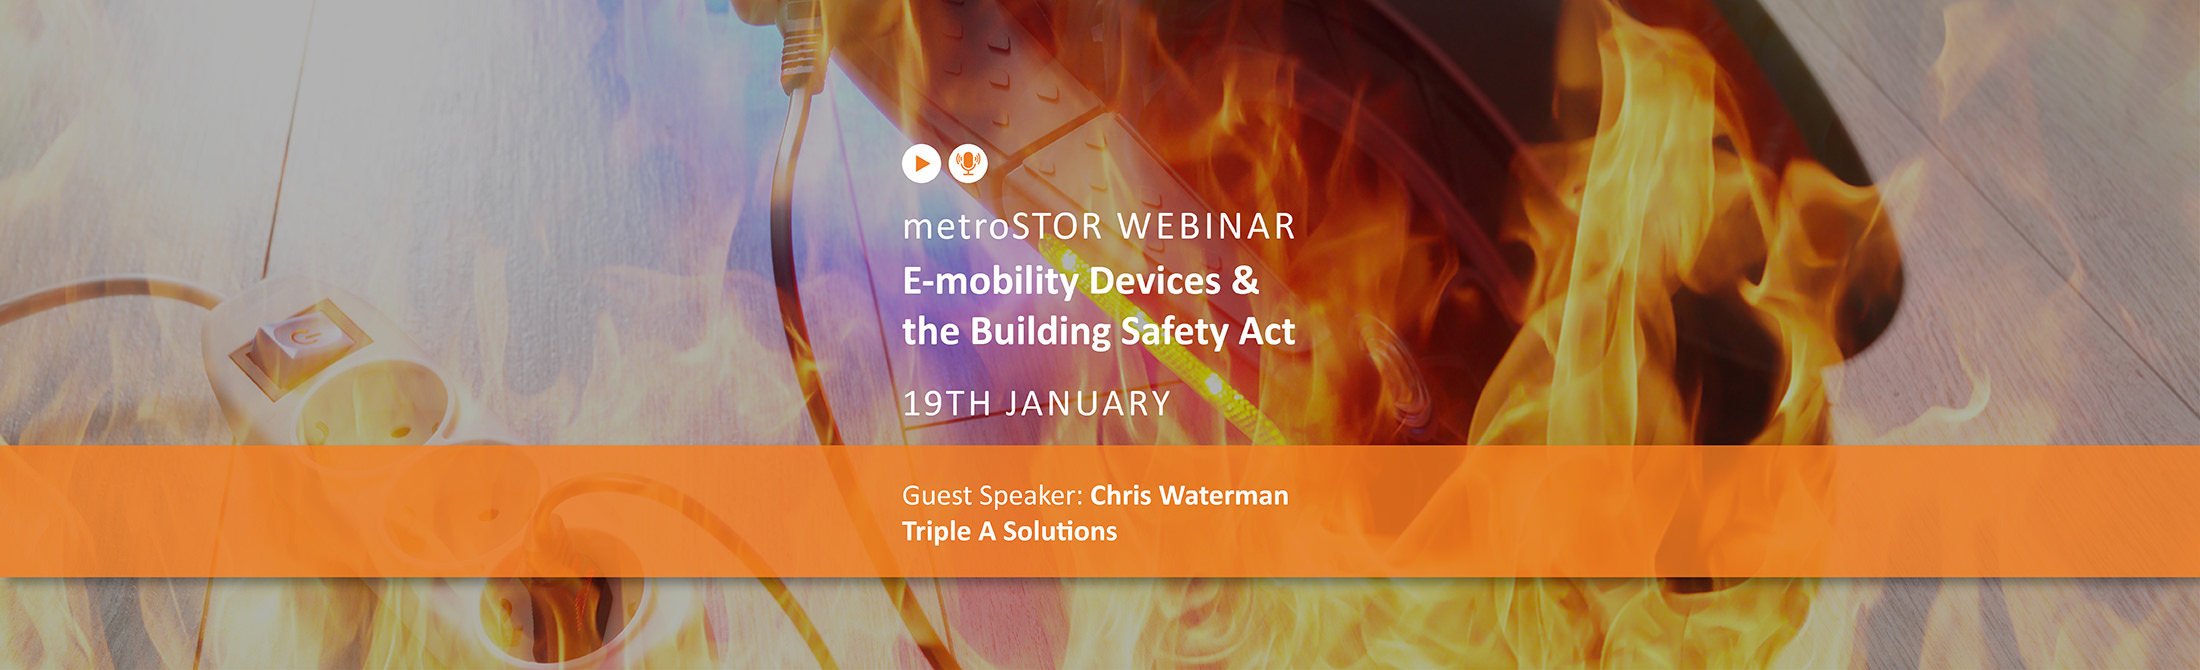 E-mobility Devices and the Building Safety Act Webinar